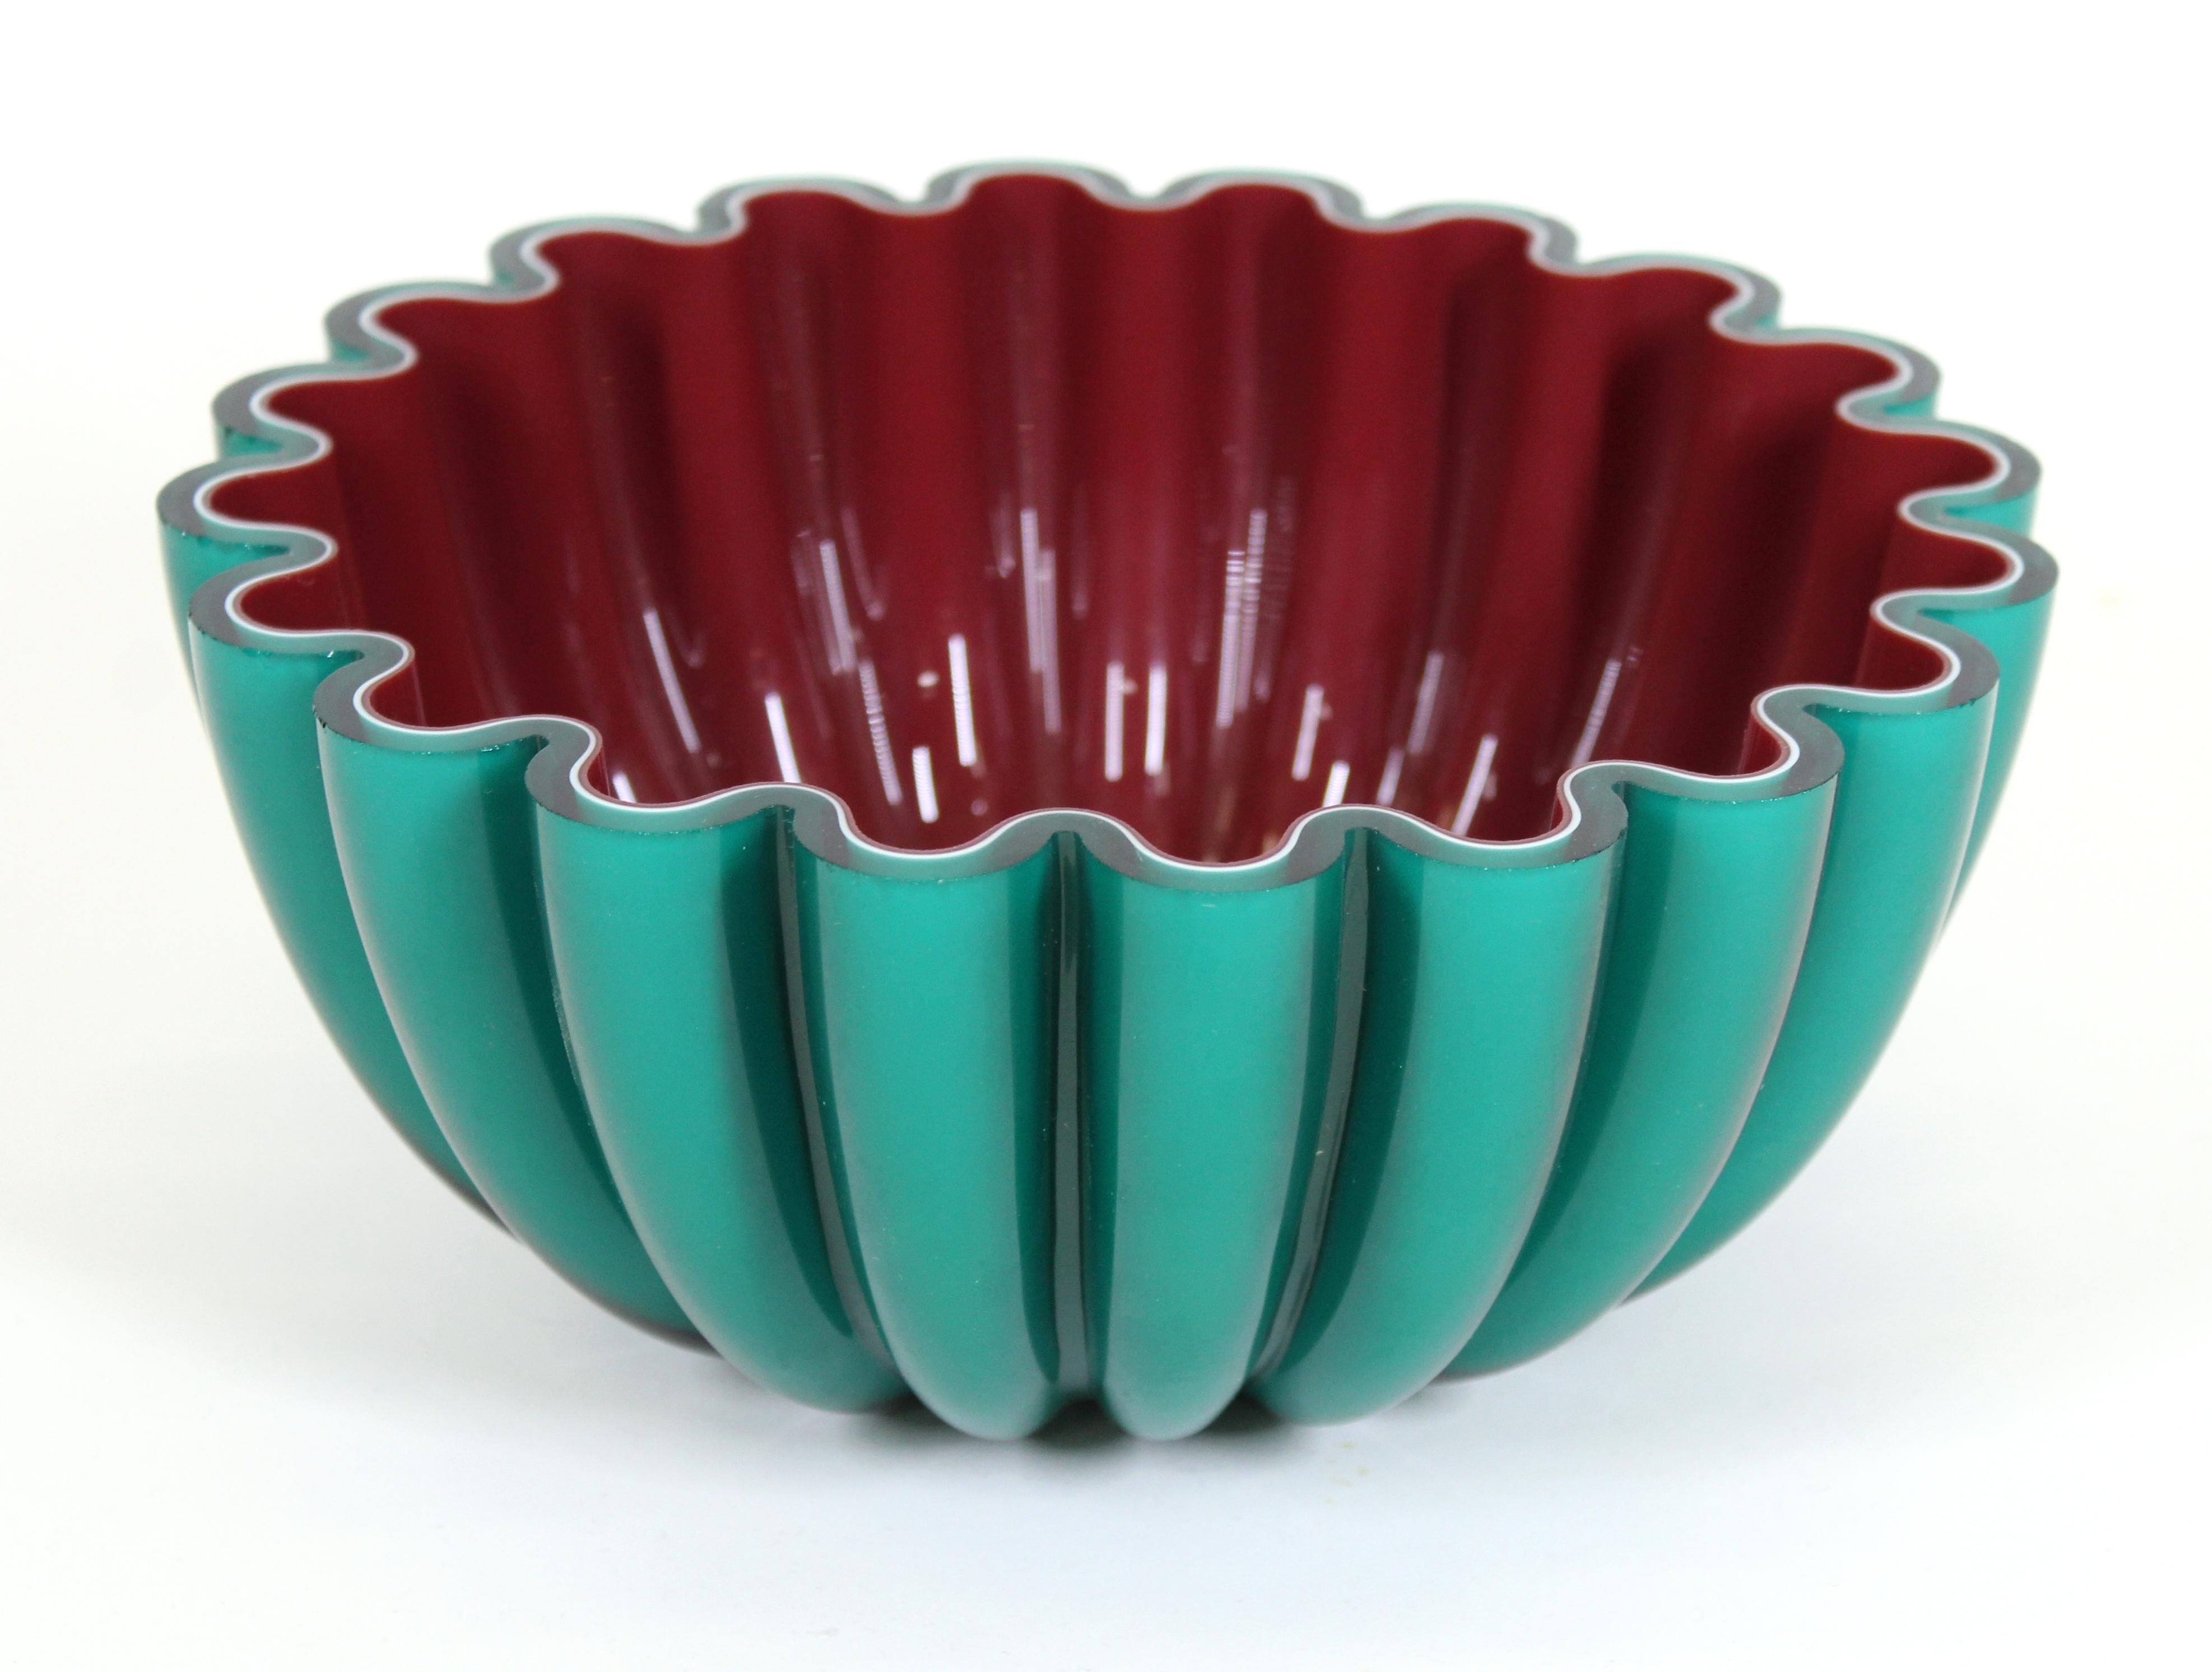 Modern art glass studio bowl in cased green, white and red glass. In great vintage condition with age-appropriate wear.